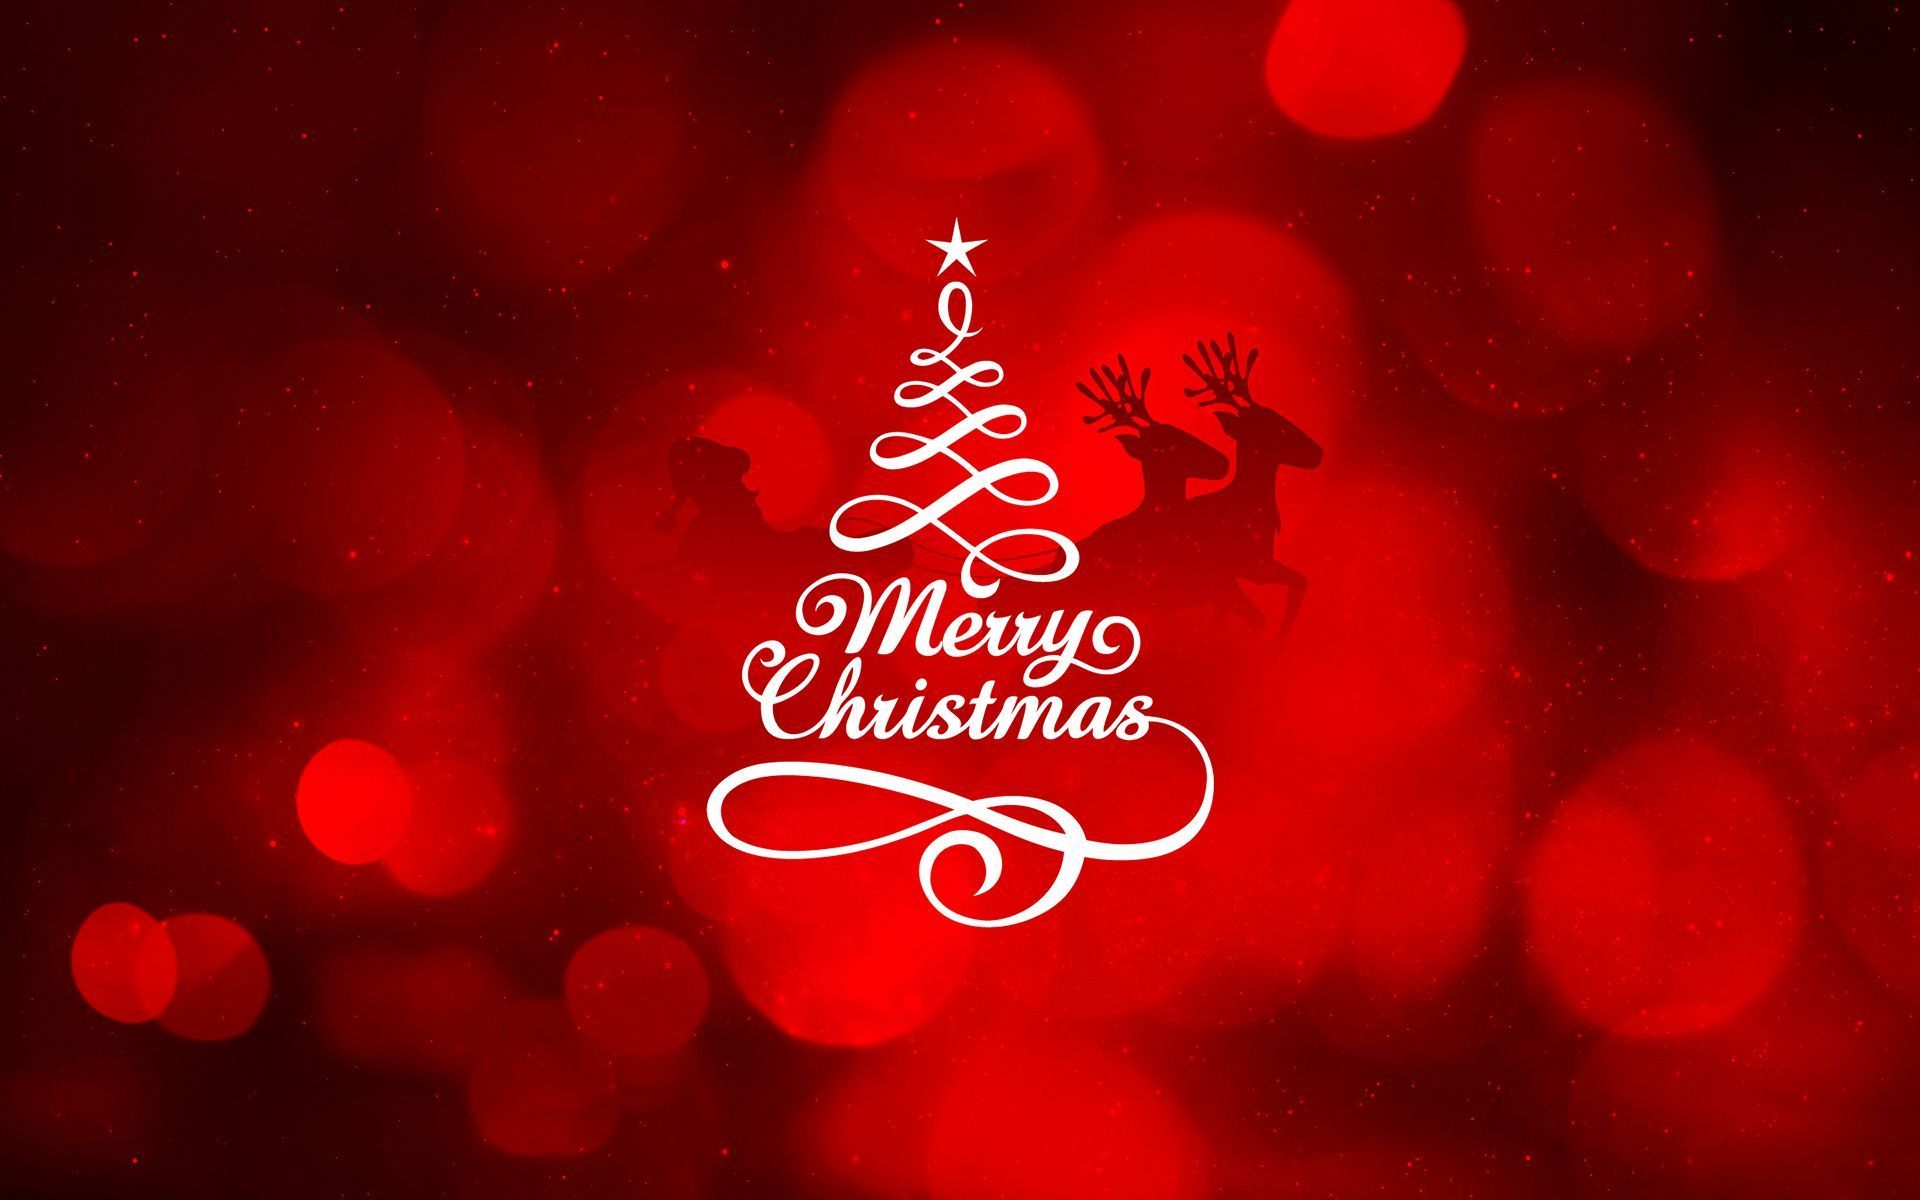 Merry Christmas New Wallpapers | HD Wallpapers